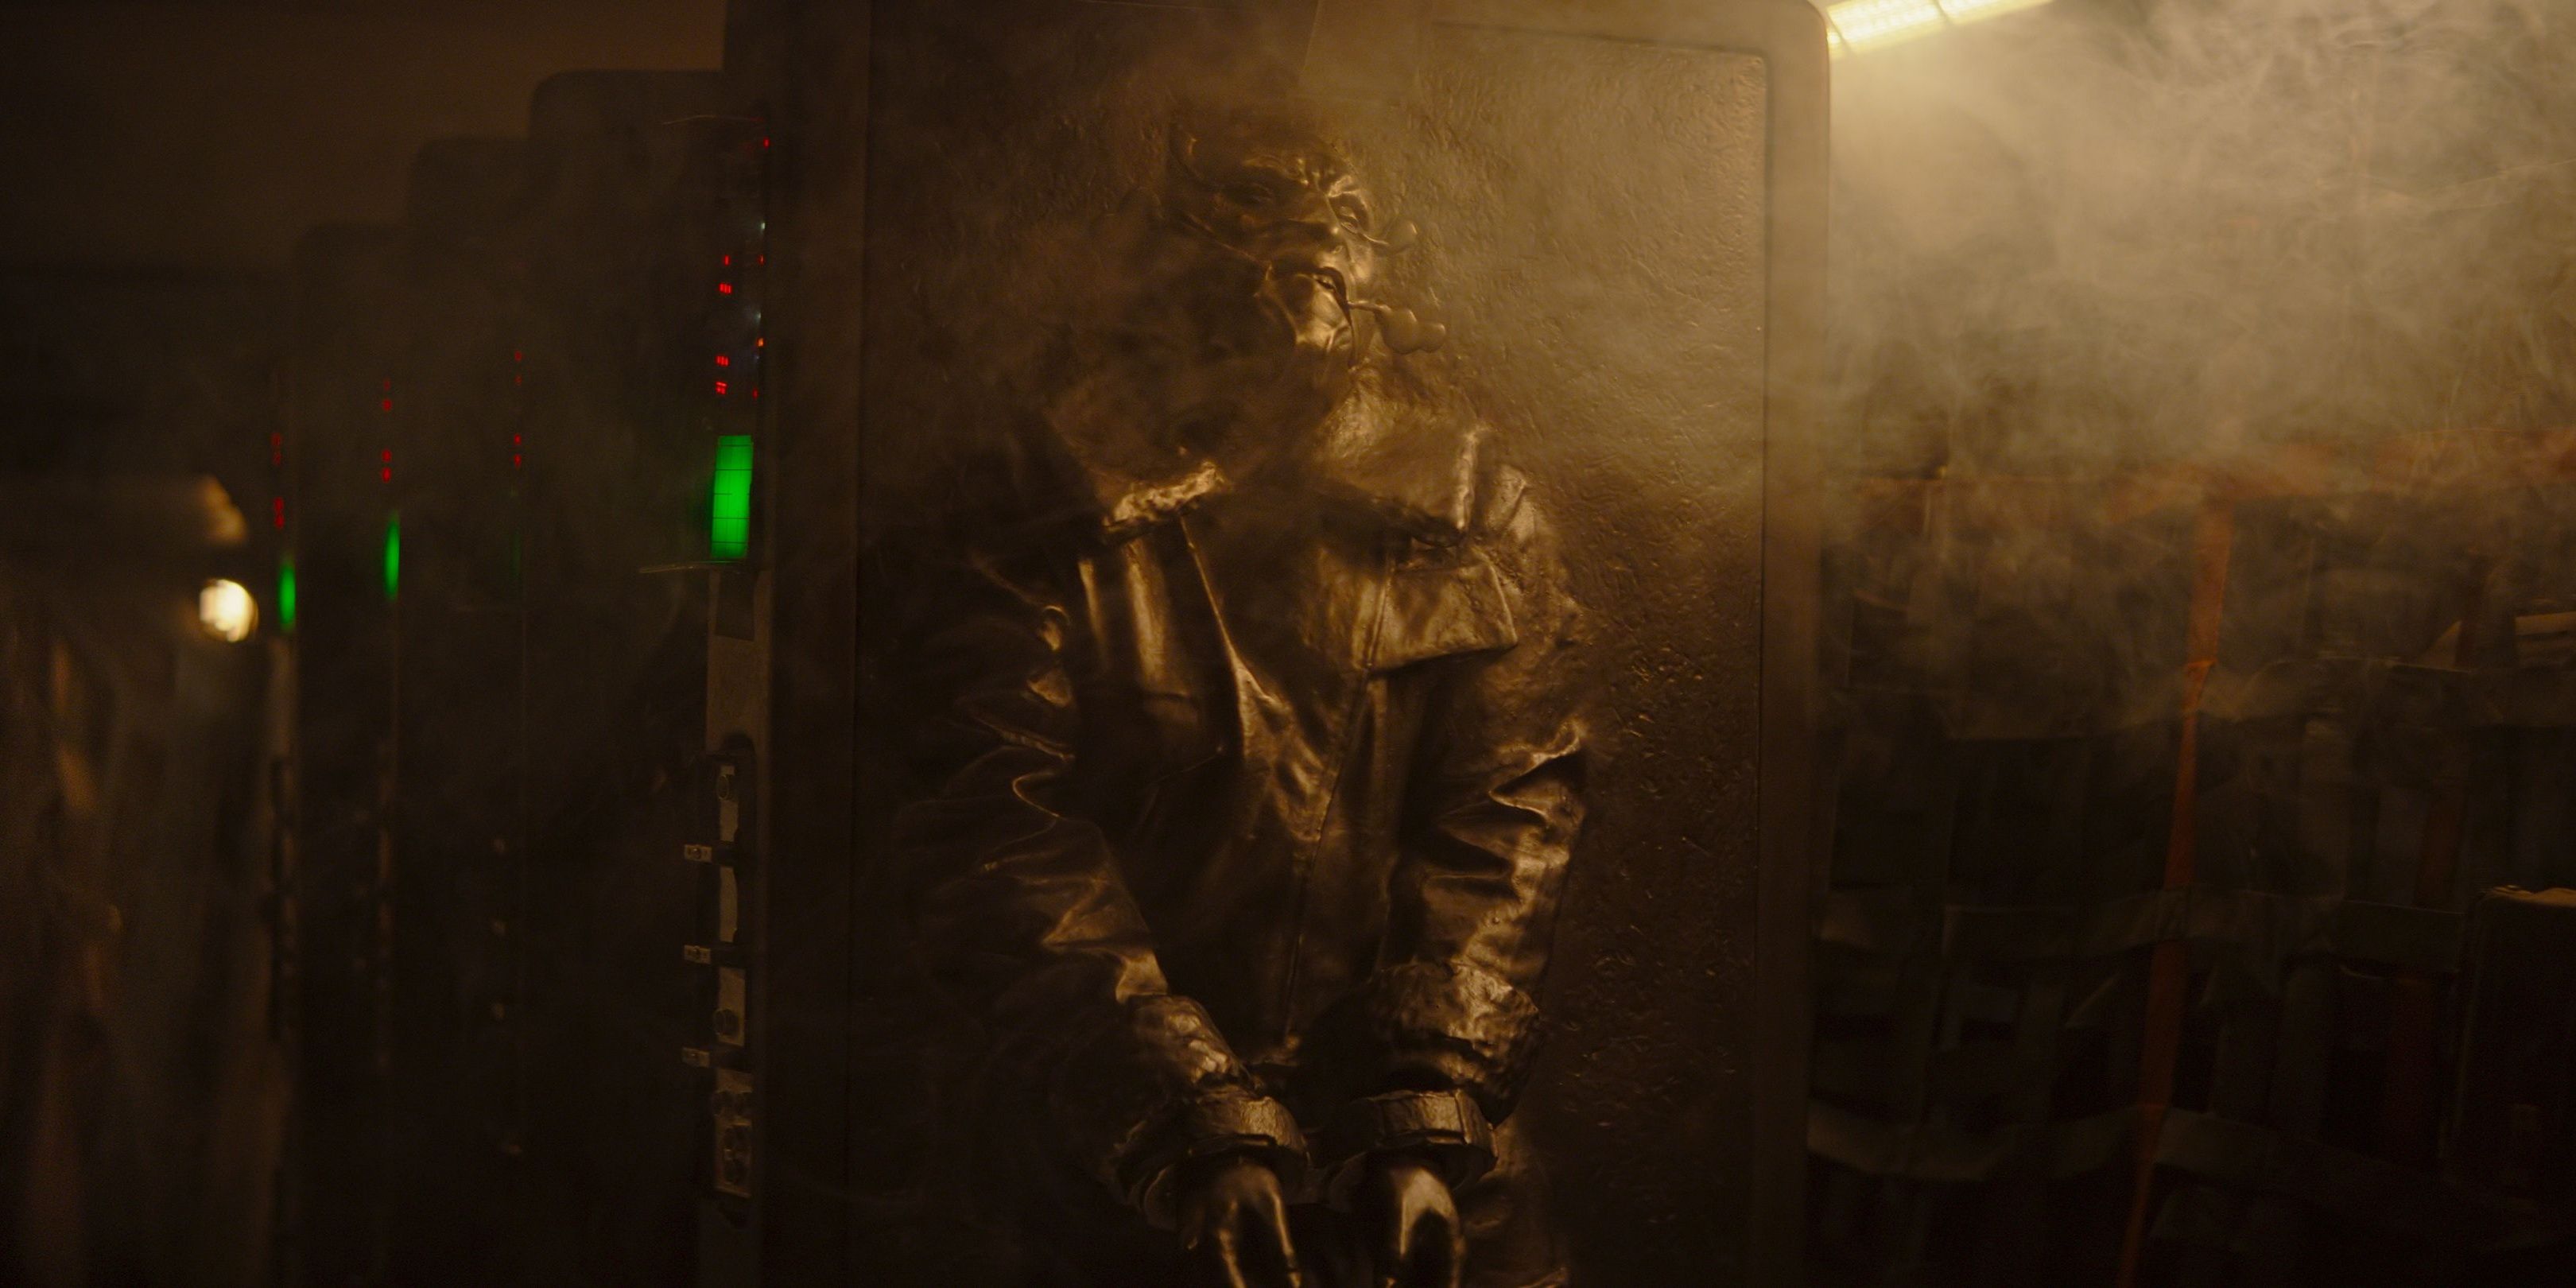 Mythrol is frozen in carbonite by Din Djarin in the firt episode of The Mandalorian